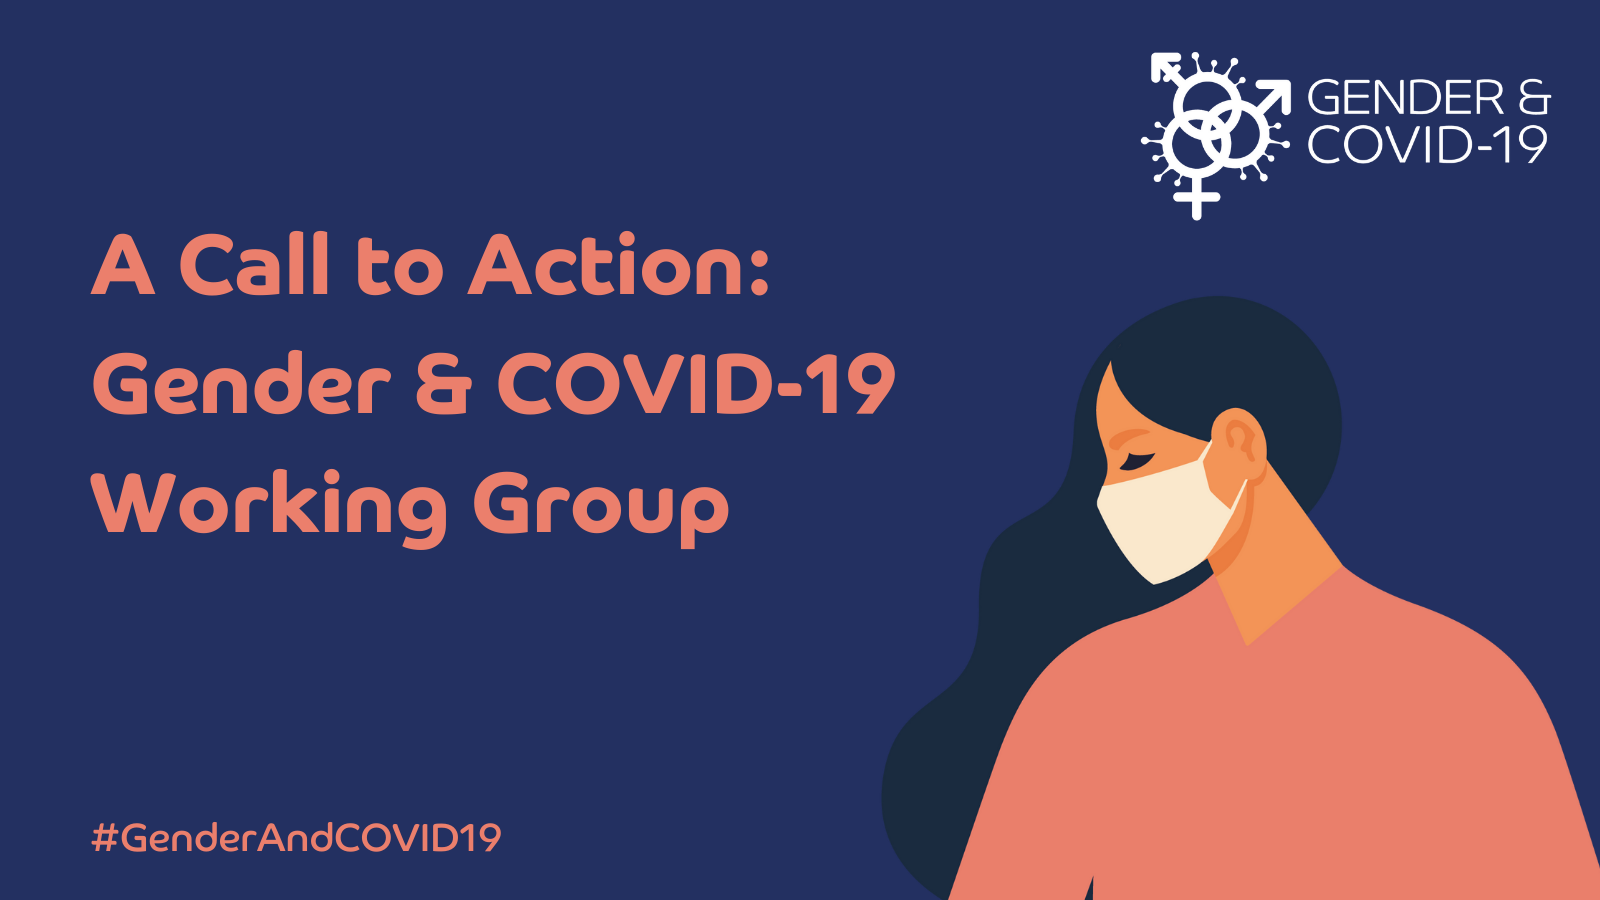 A Call to Action: Gender & COVID-19 working group